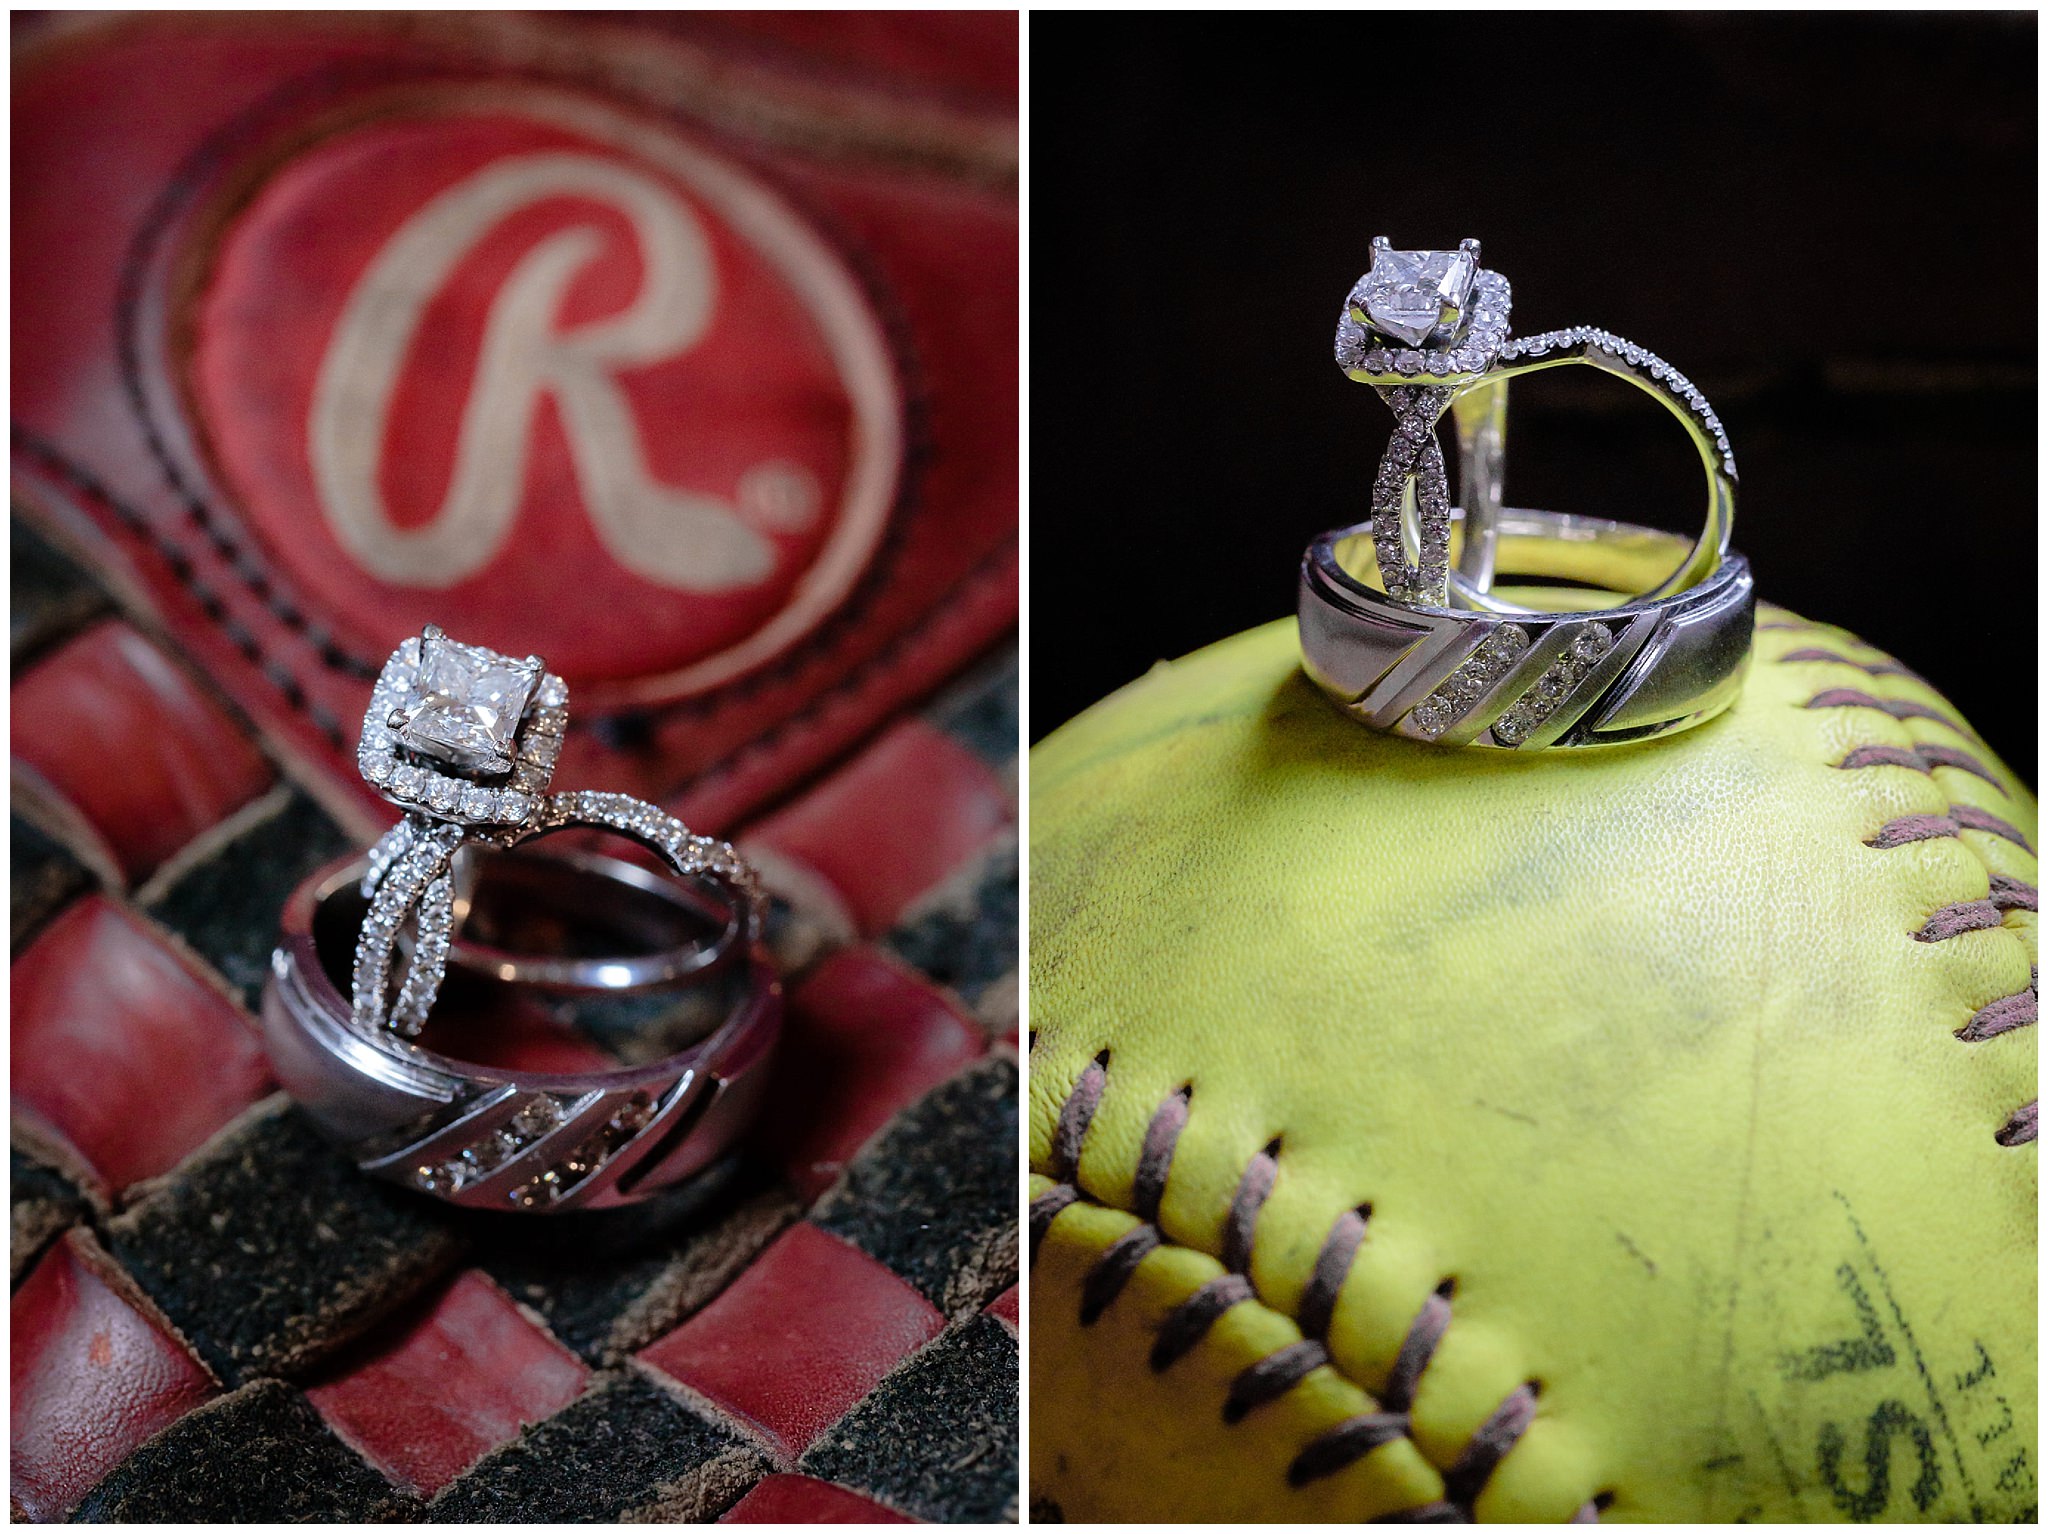 Wedding bands from Jared & Zales on a softball and softball glove